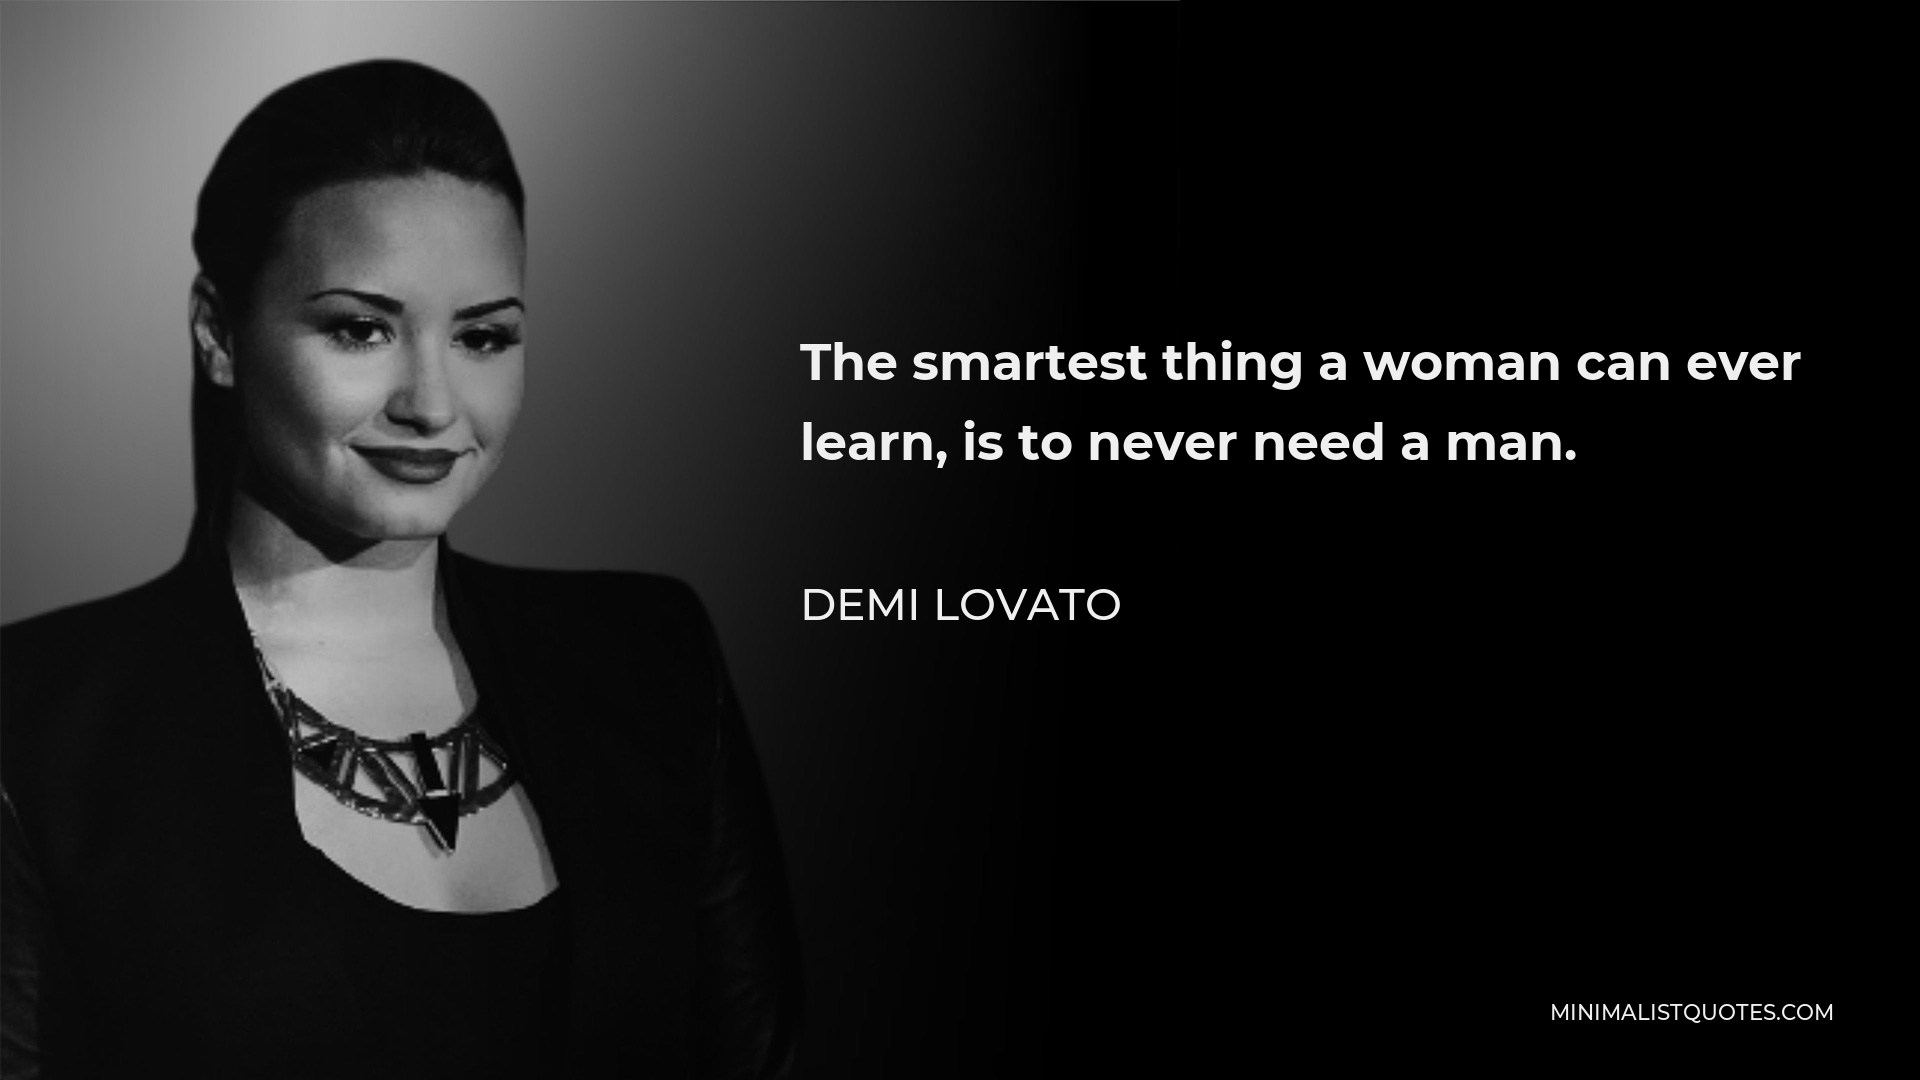 Demi Lovato Quote - The smartest thing a woman can ever learn, is to never need a man.